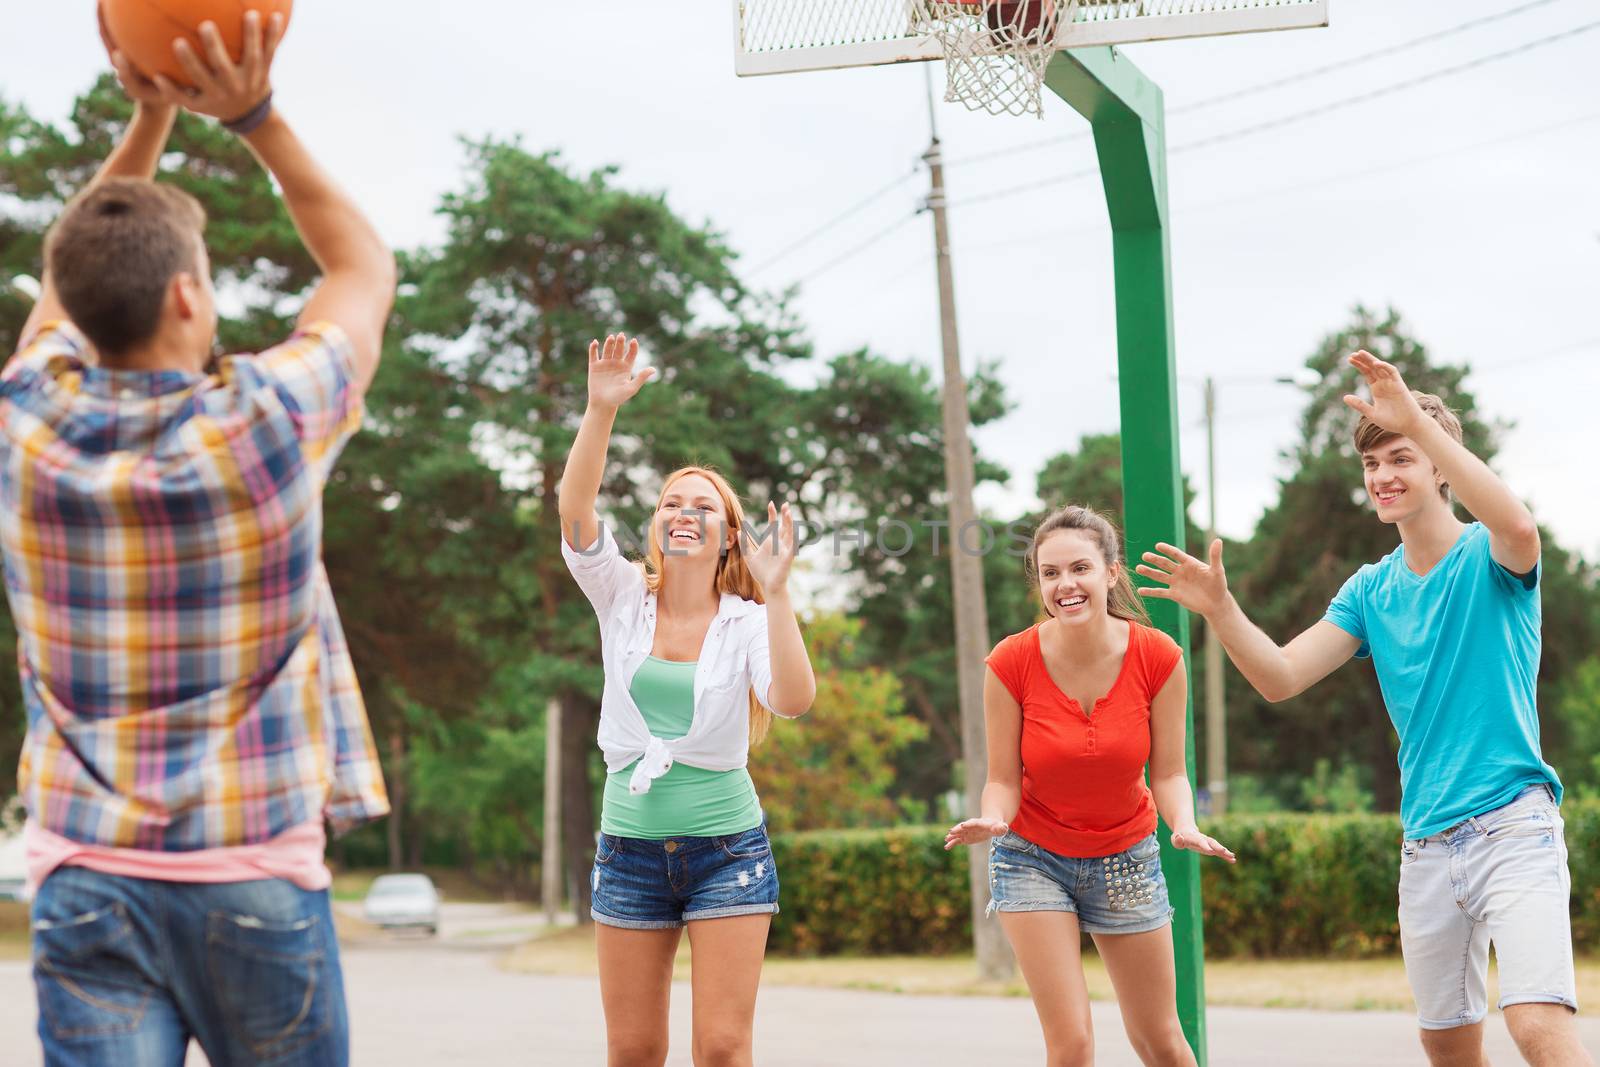 summer vacation, holidays, games and friendship concept - group of smiling teenagers playing basketball outdoors